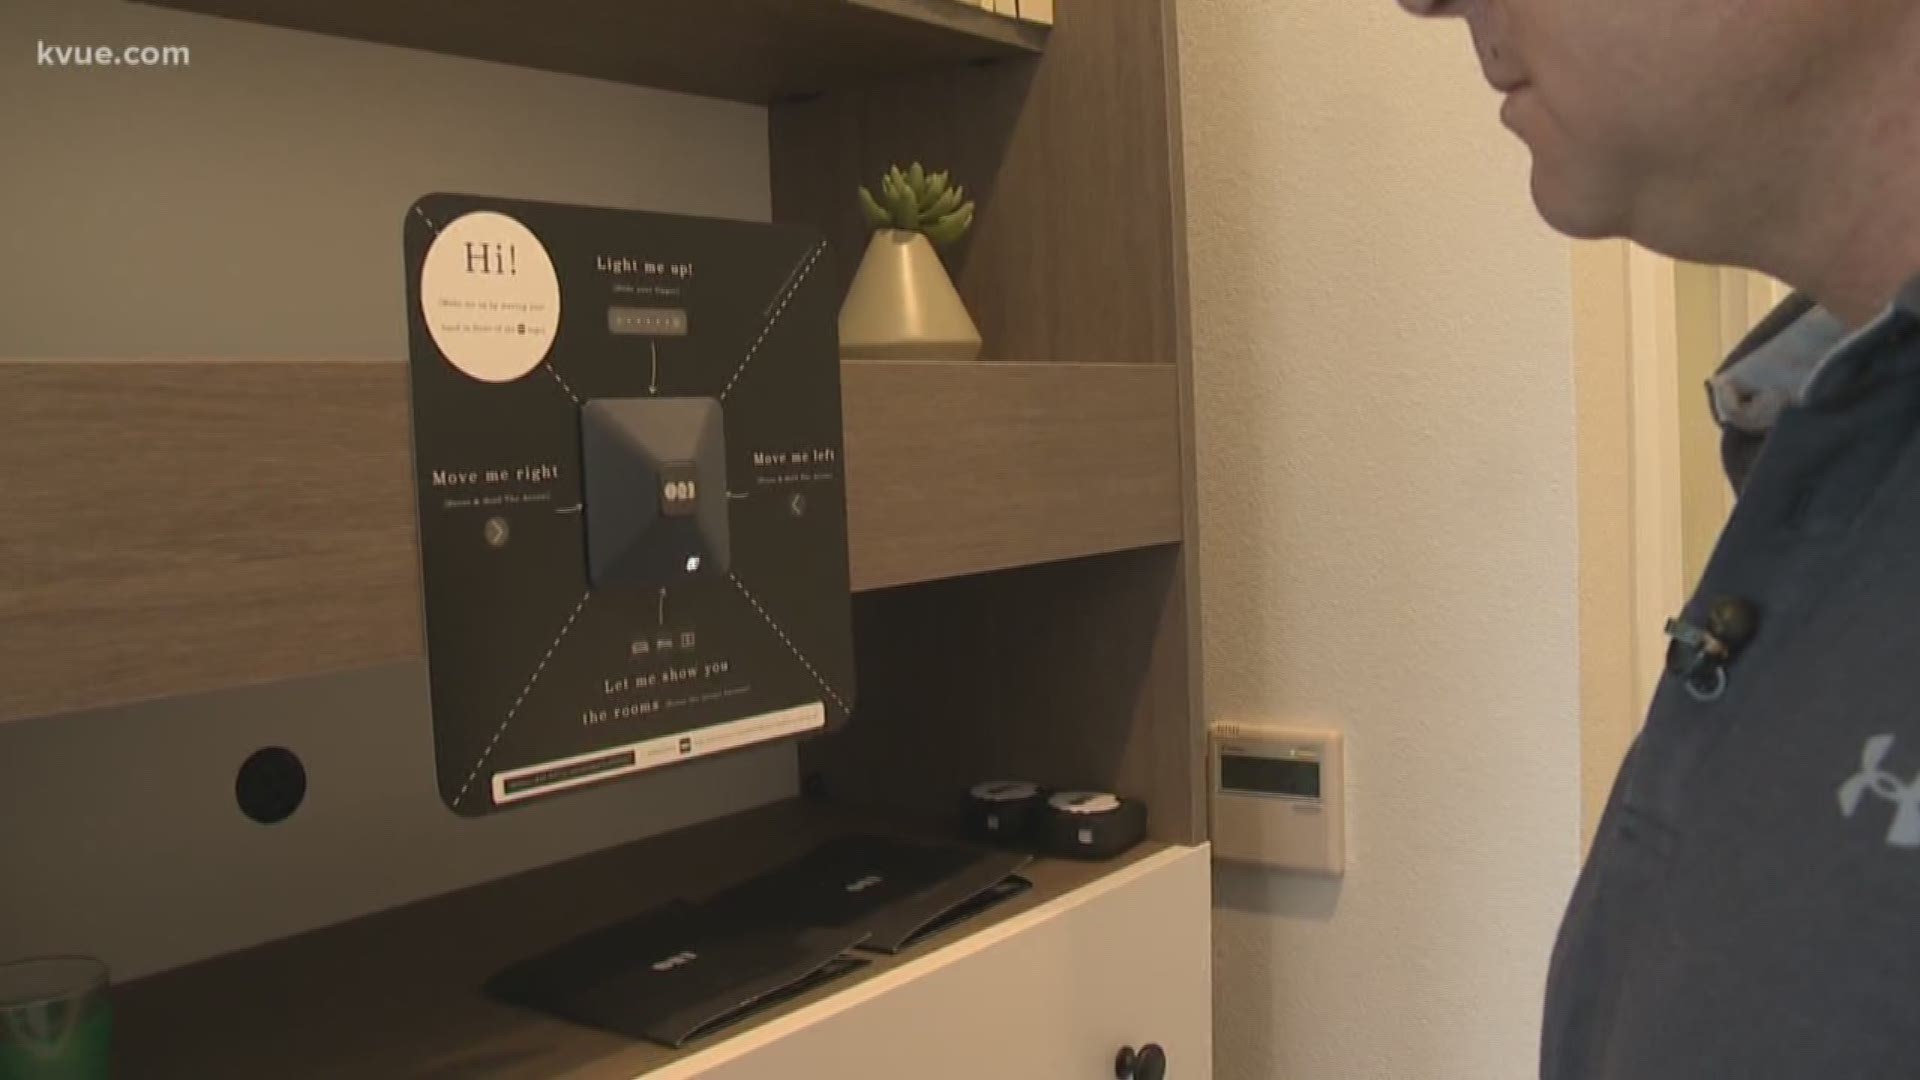 A new condo development in East Austin is the only one in Texas with a robotic furniture system. It's designed to make the micro units feel bigger.